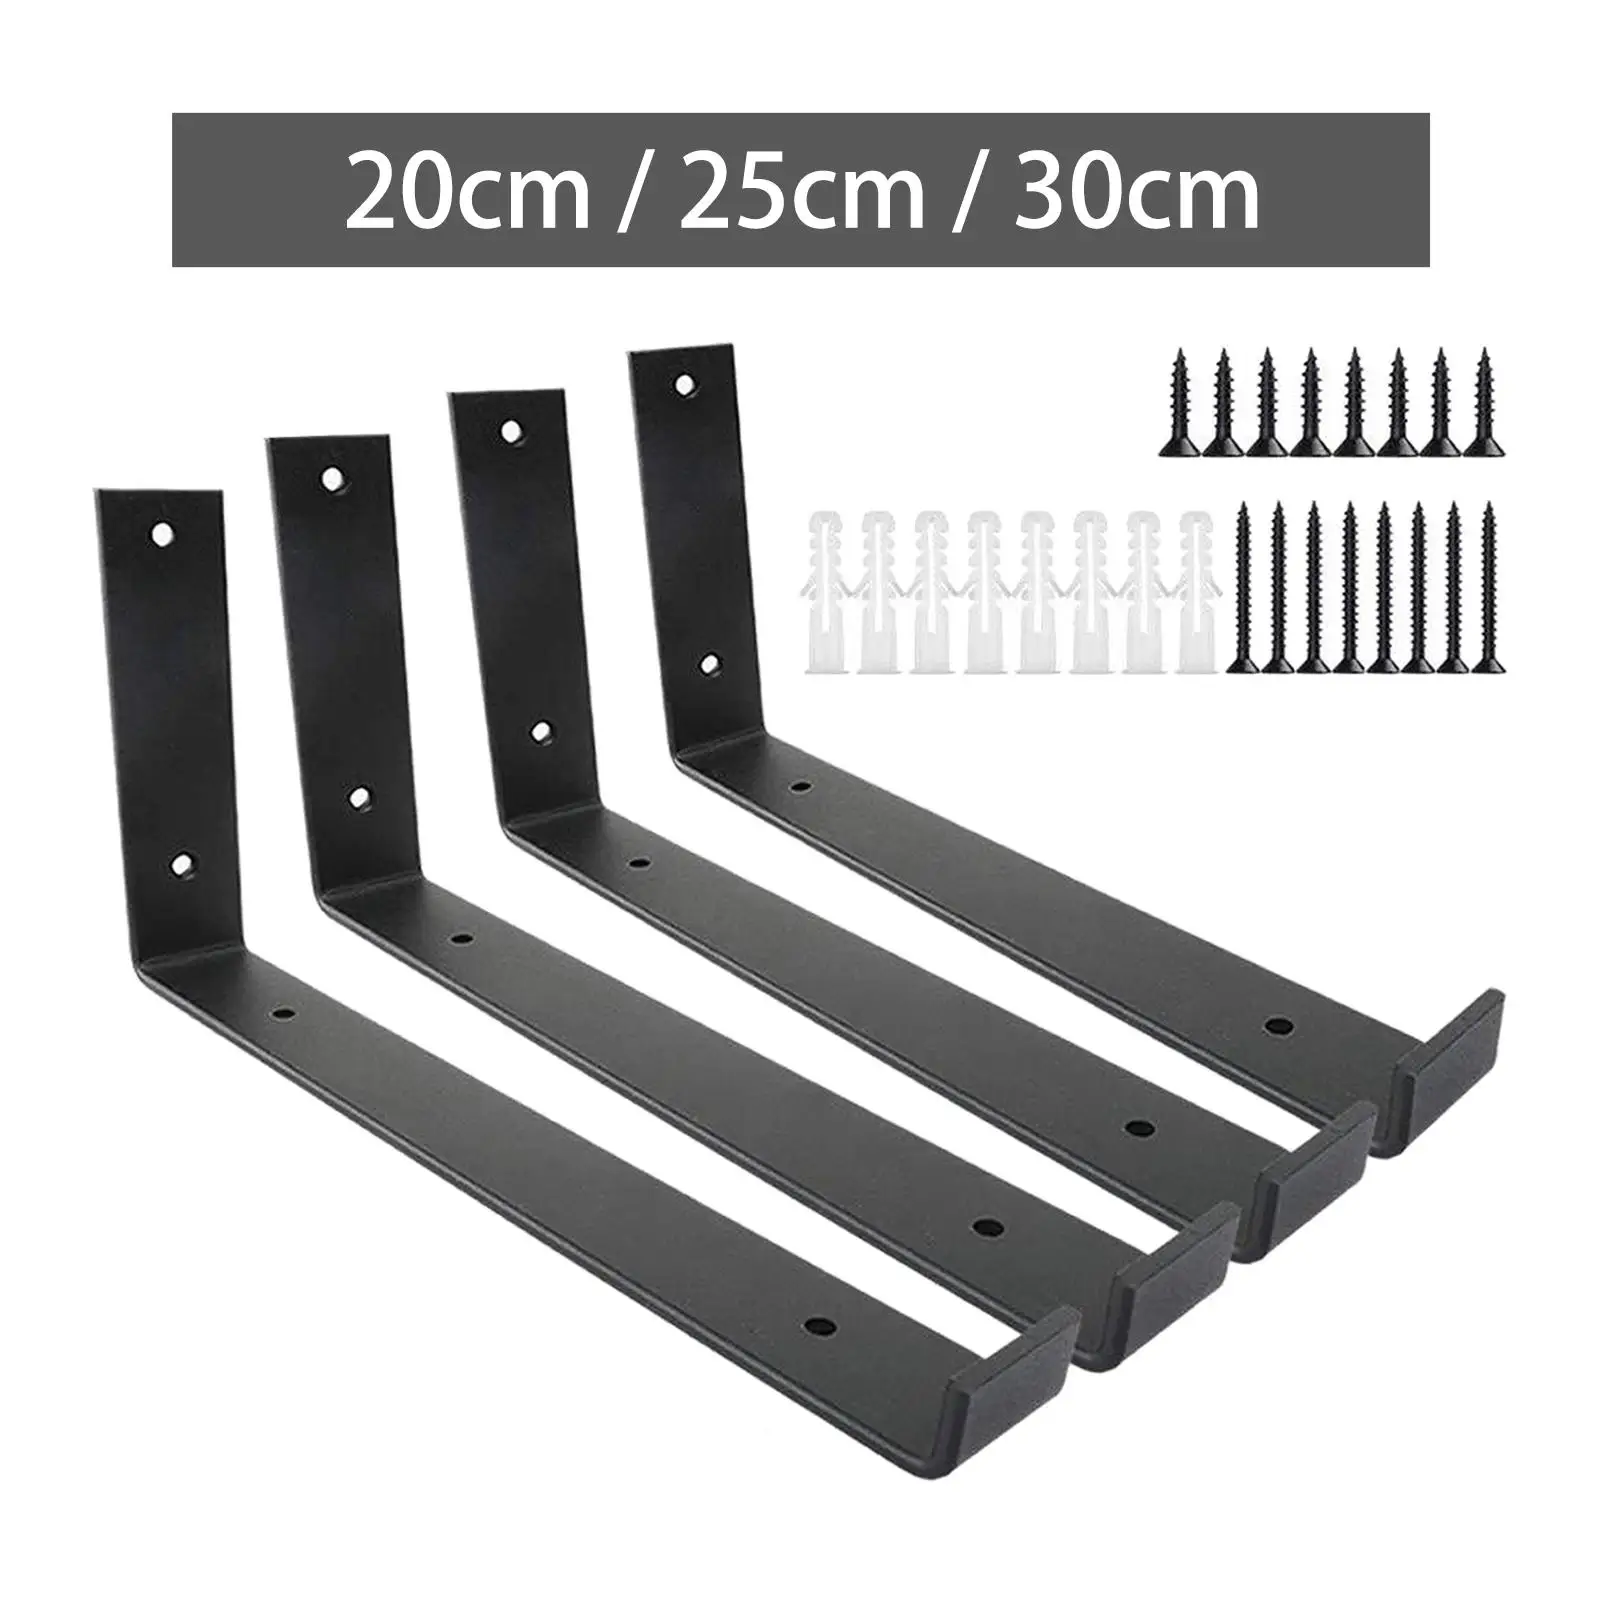 4 Pieces Shelf Bracket Thick Ornament Wall Mounted for Indoor Garage Office